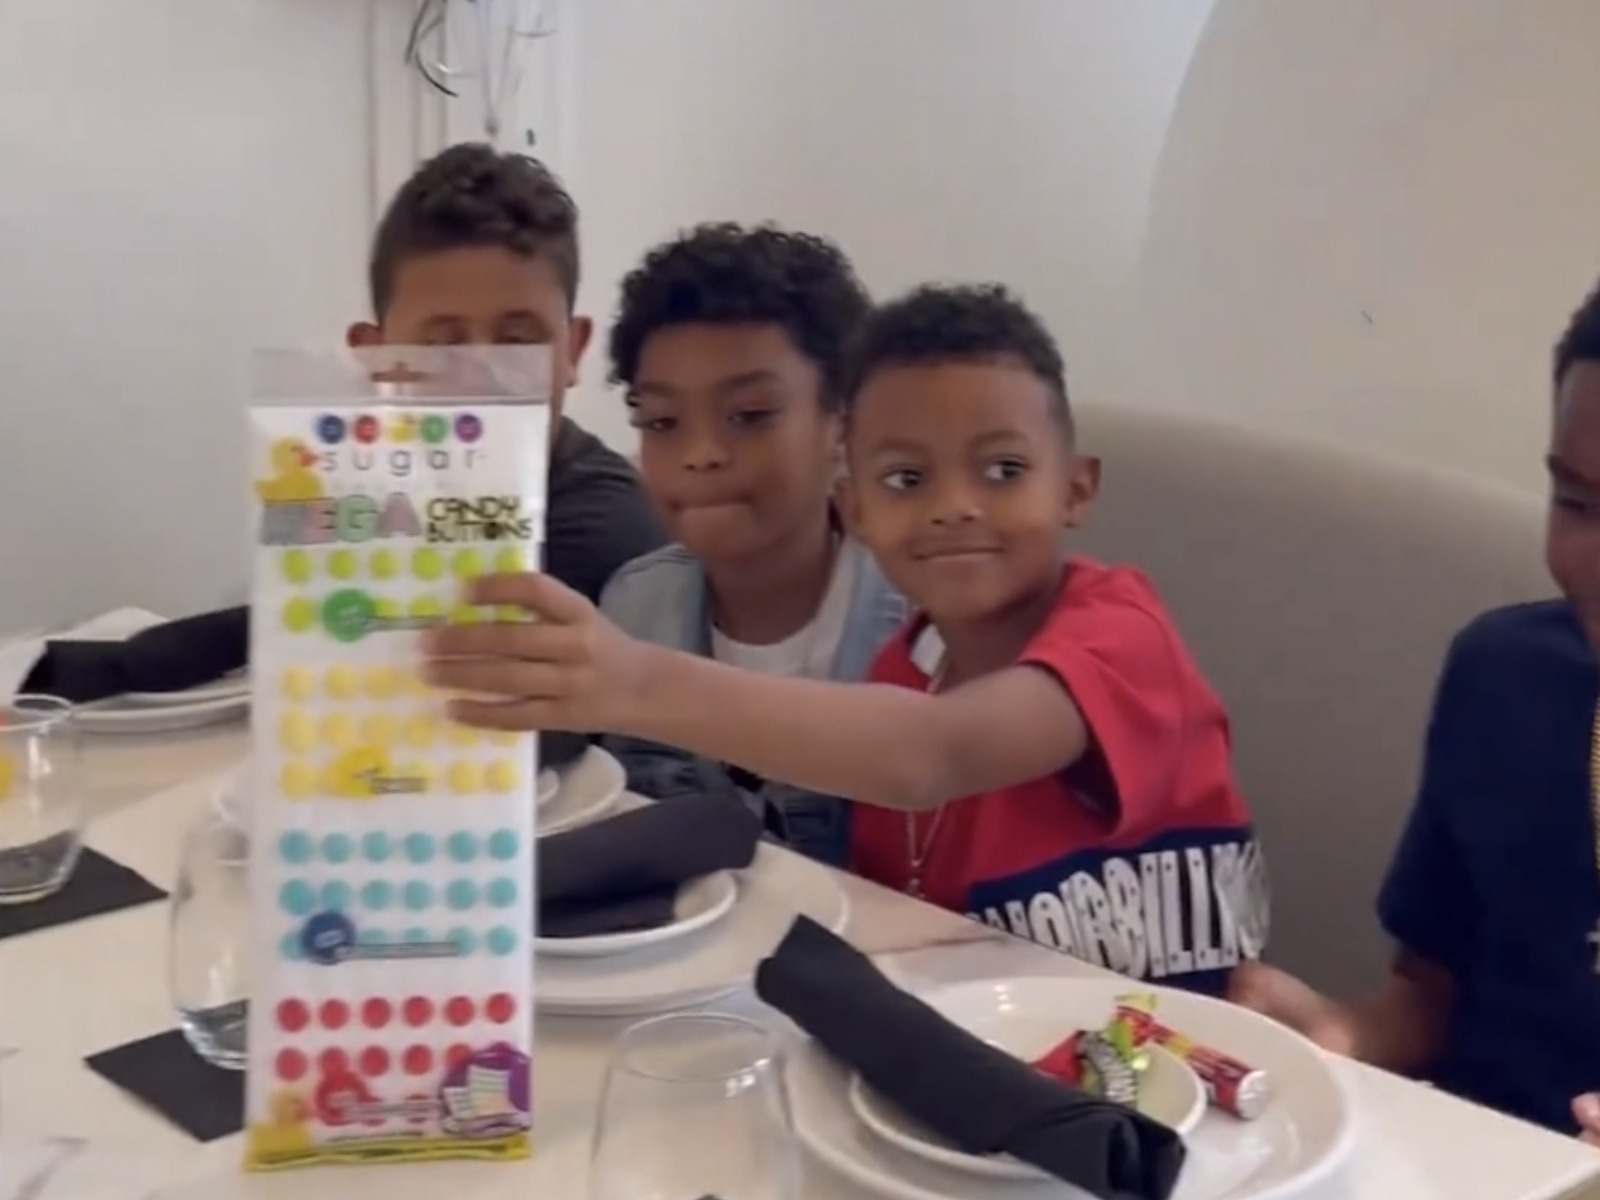 50 Cent’s Son Turns Up At It’s Sugar For ninth Birthday